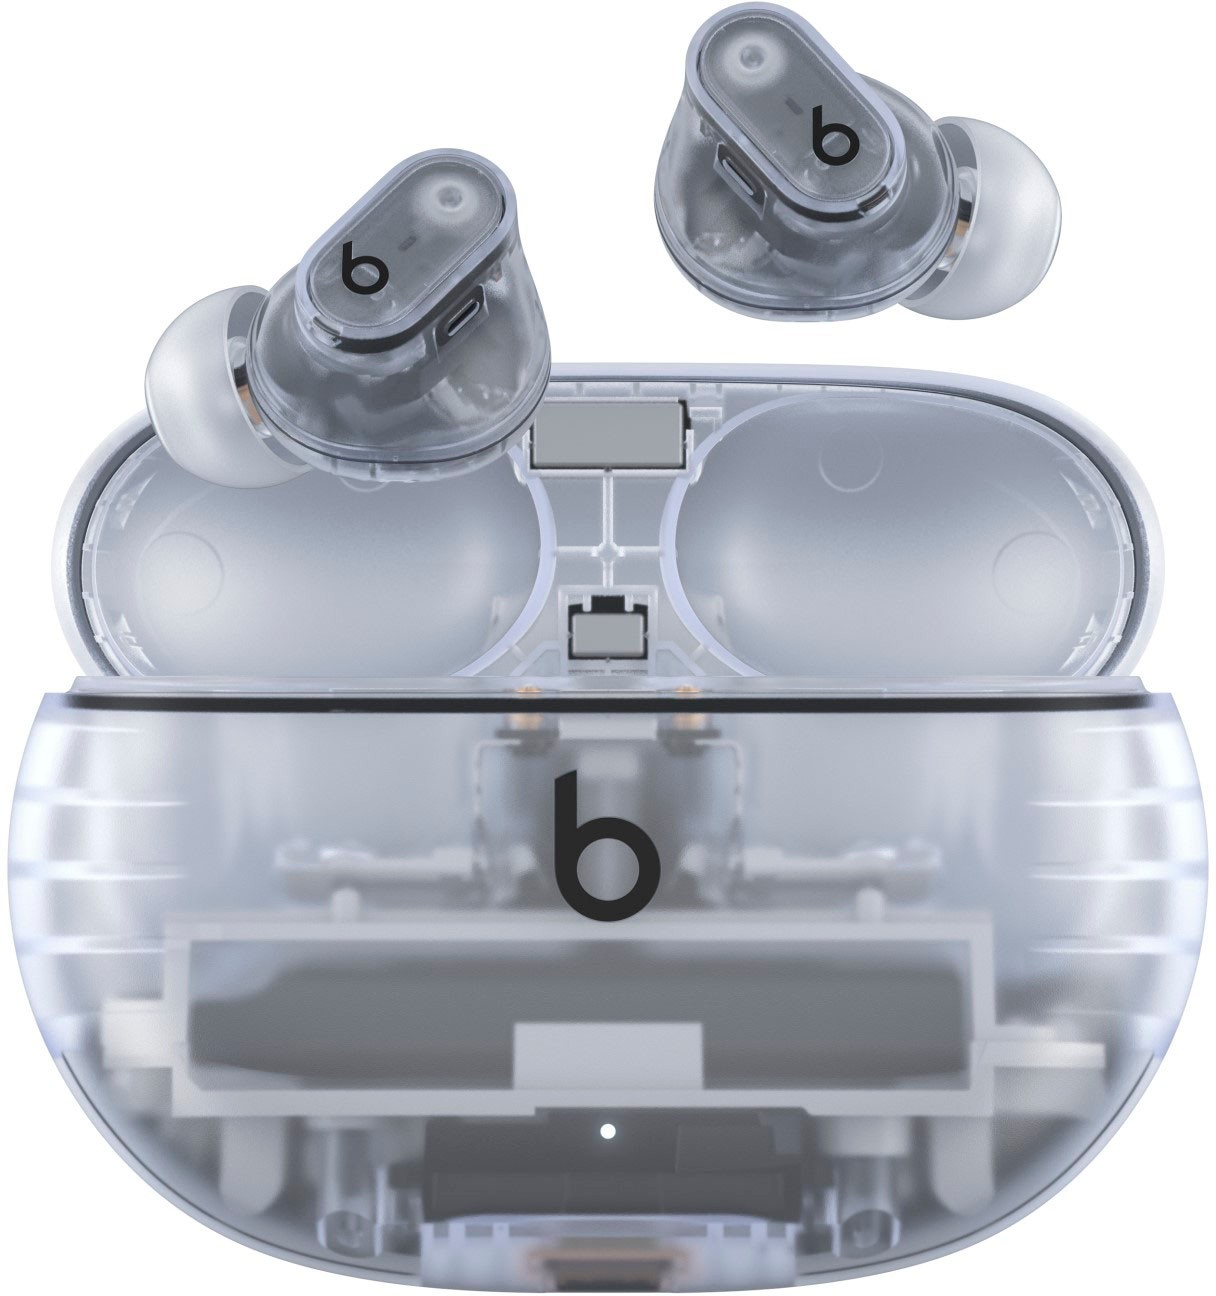 Beats Studio Buds True Wireless Noise Cancelling Earbuds Transparent - RECON